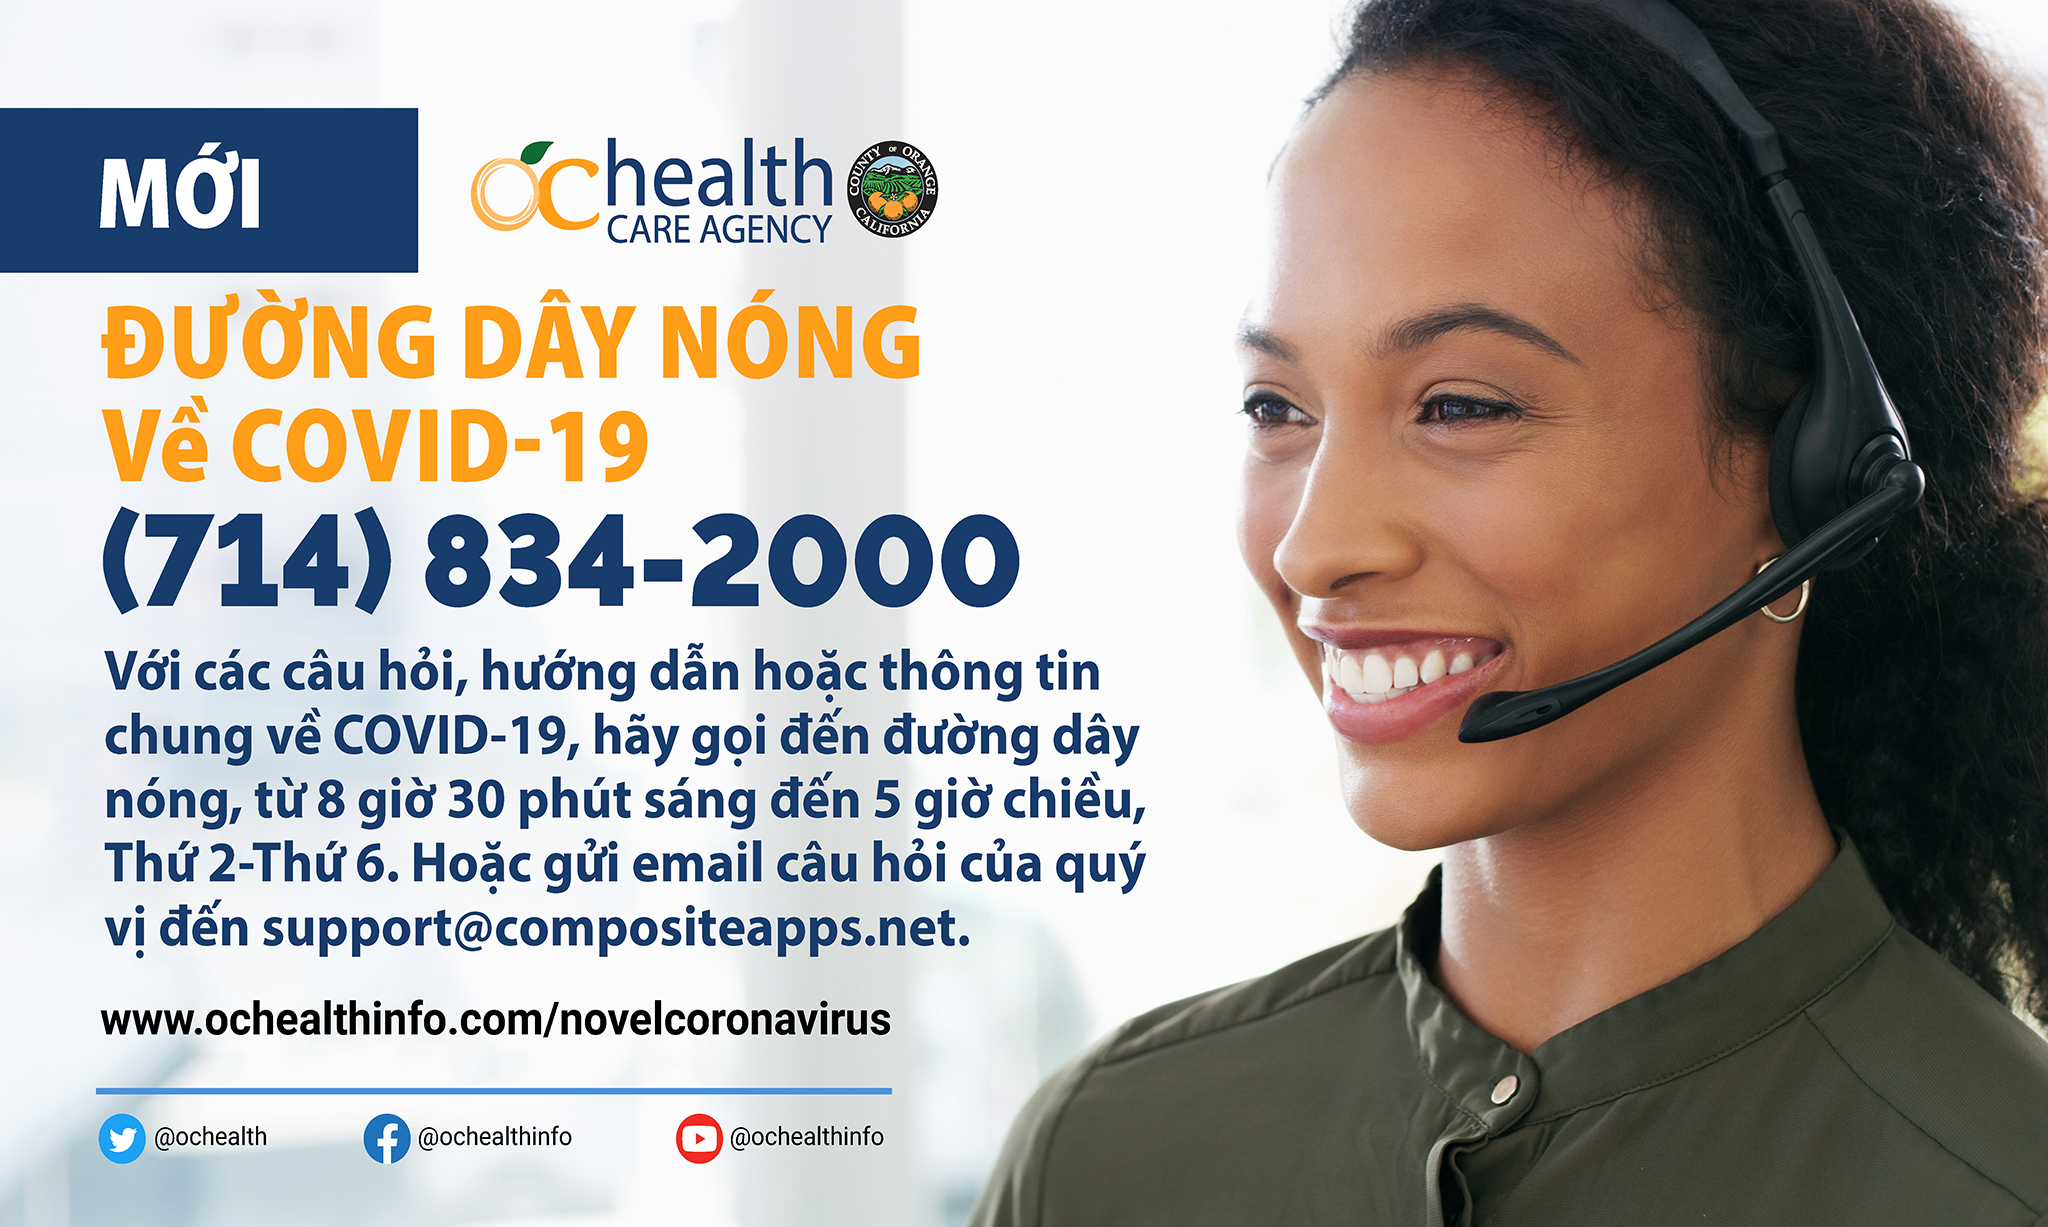 Duong day nong ve COVID 714-834-2000